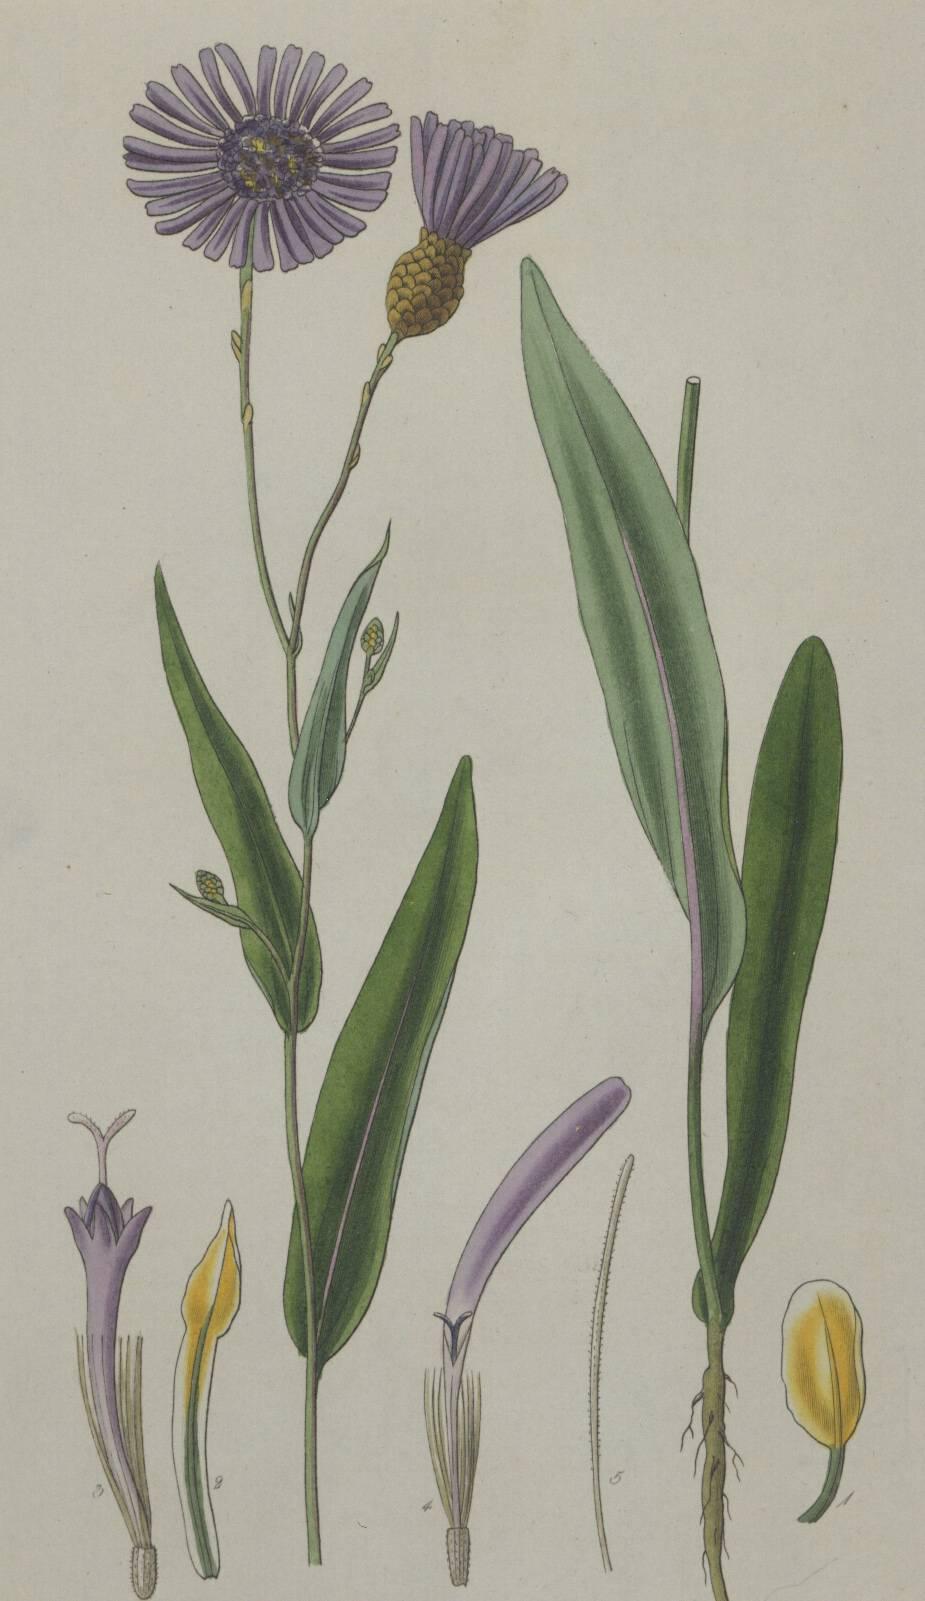 Purpl and Yellow Curtis Flowers - Naturalistic Print by Sydenham Edwards